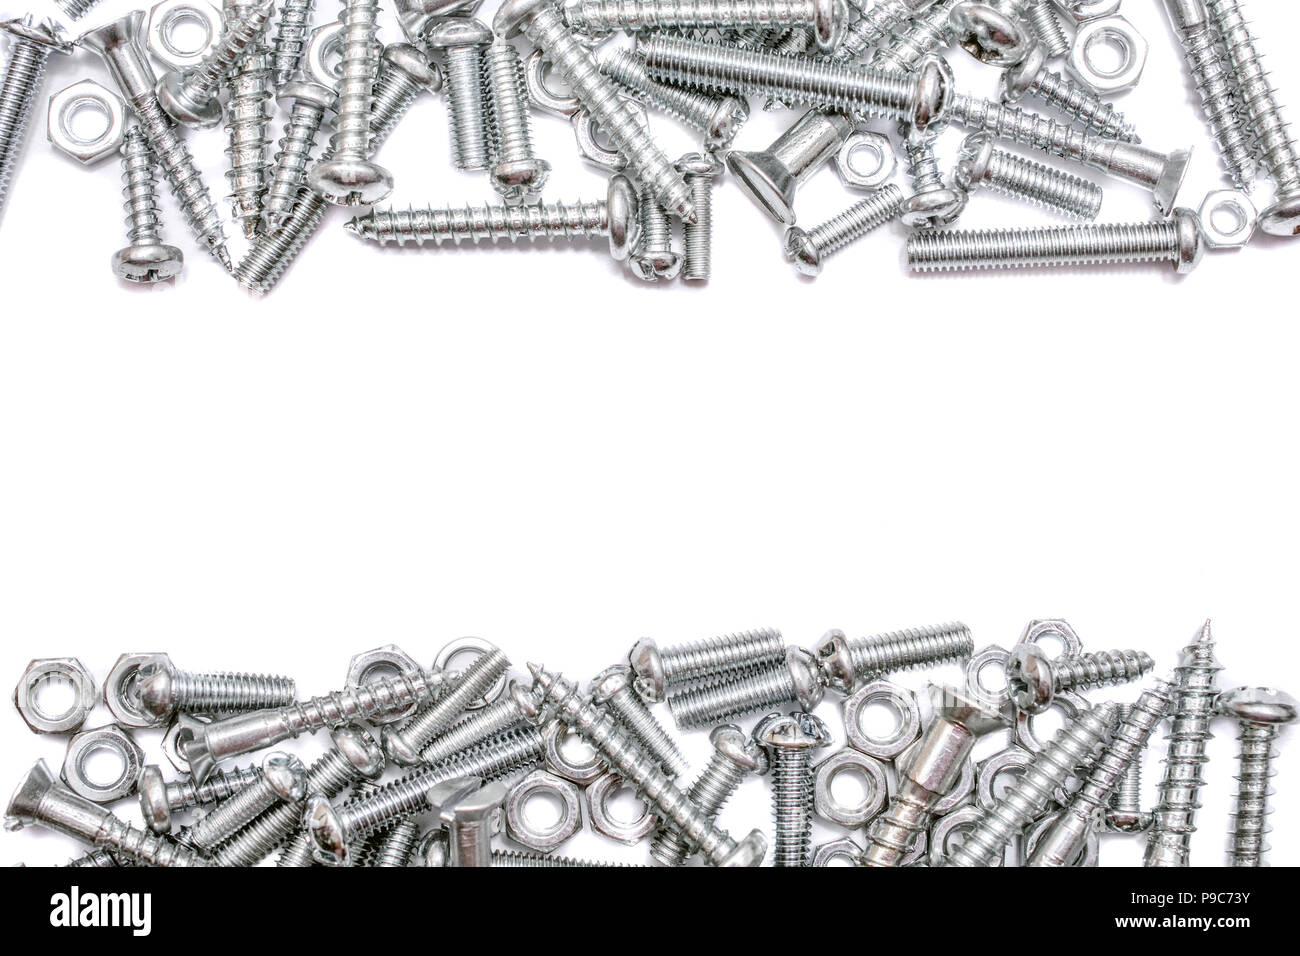 Collection Of Iron Screws, Wood Screws and Bolts With A Free Line For Text In The Middle Stock Photo